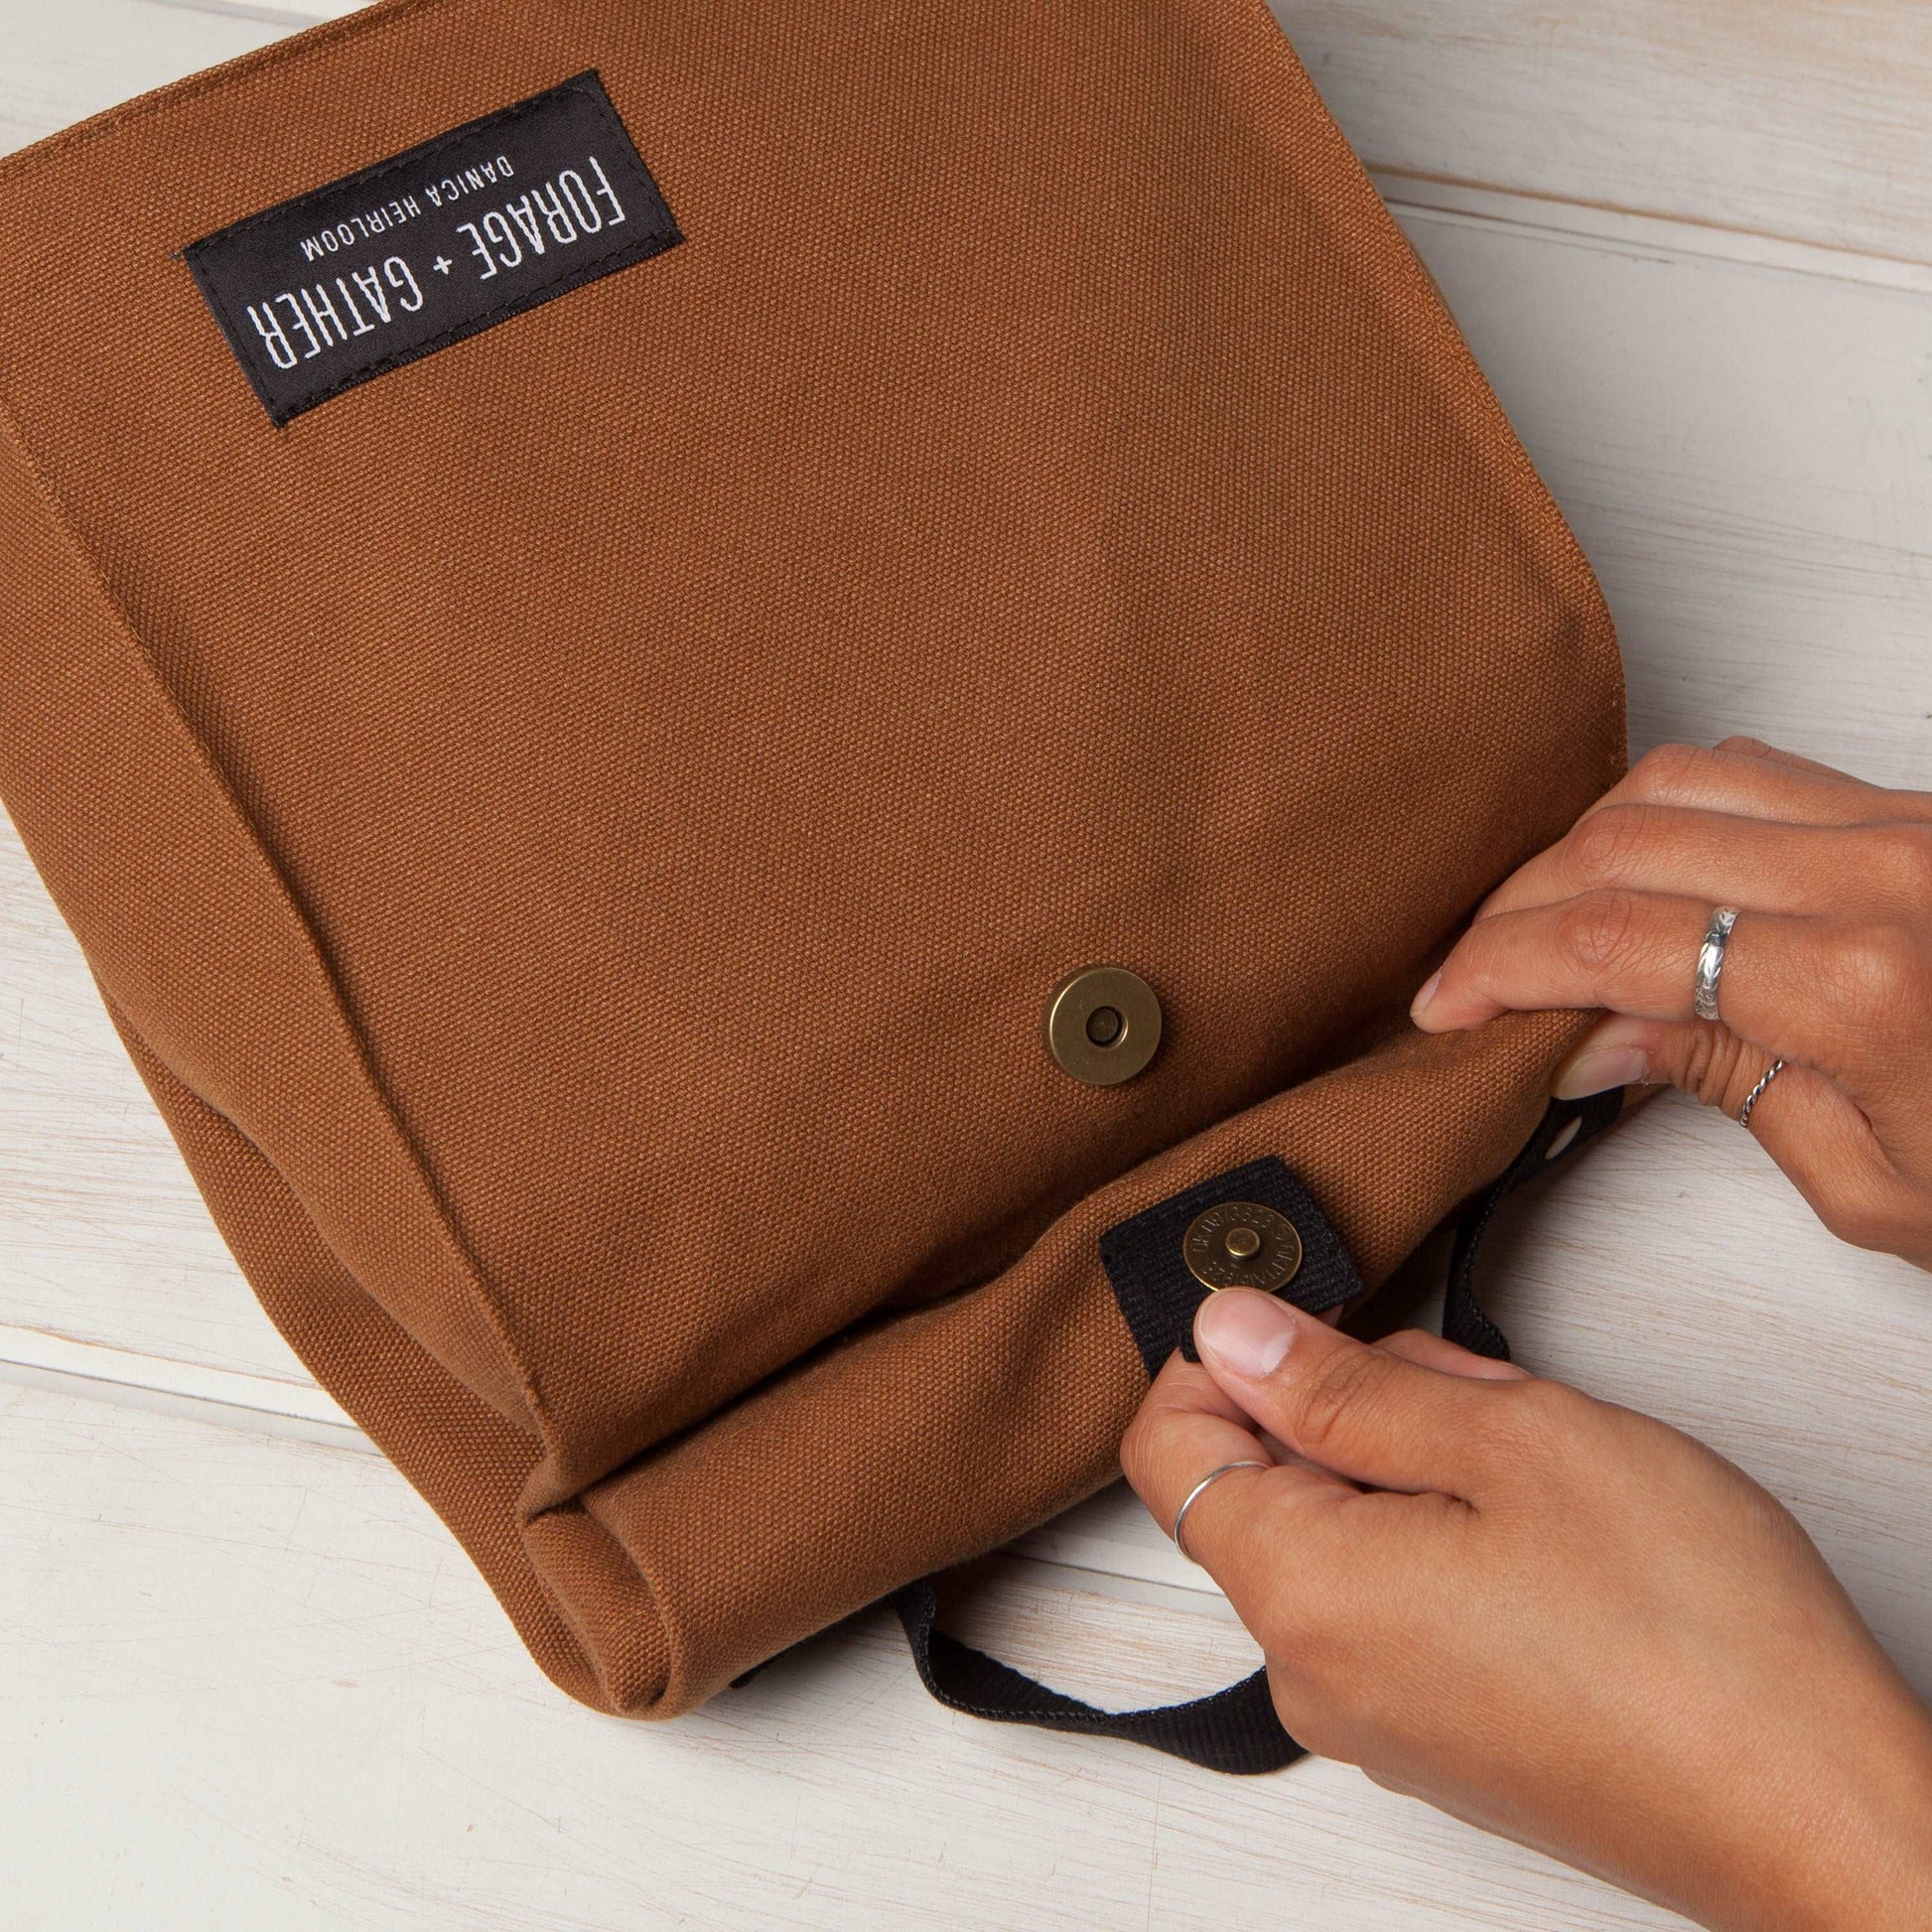 Forage + Gather Lunch Bag - Brown